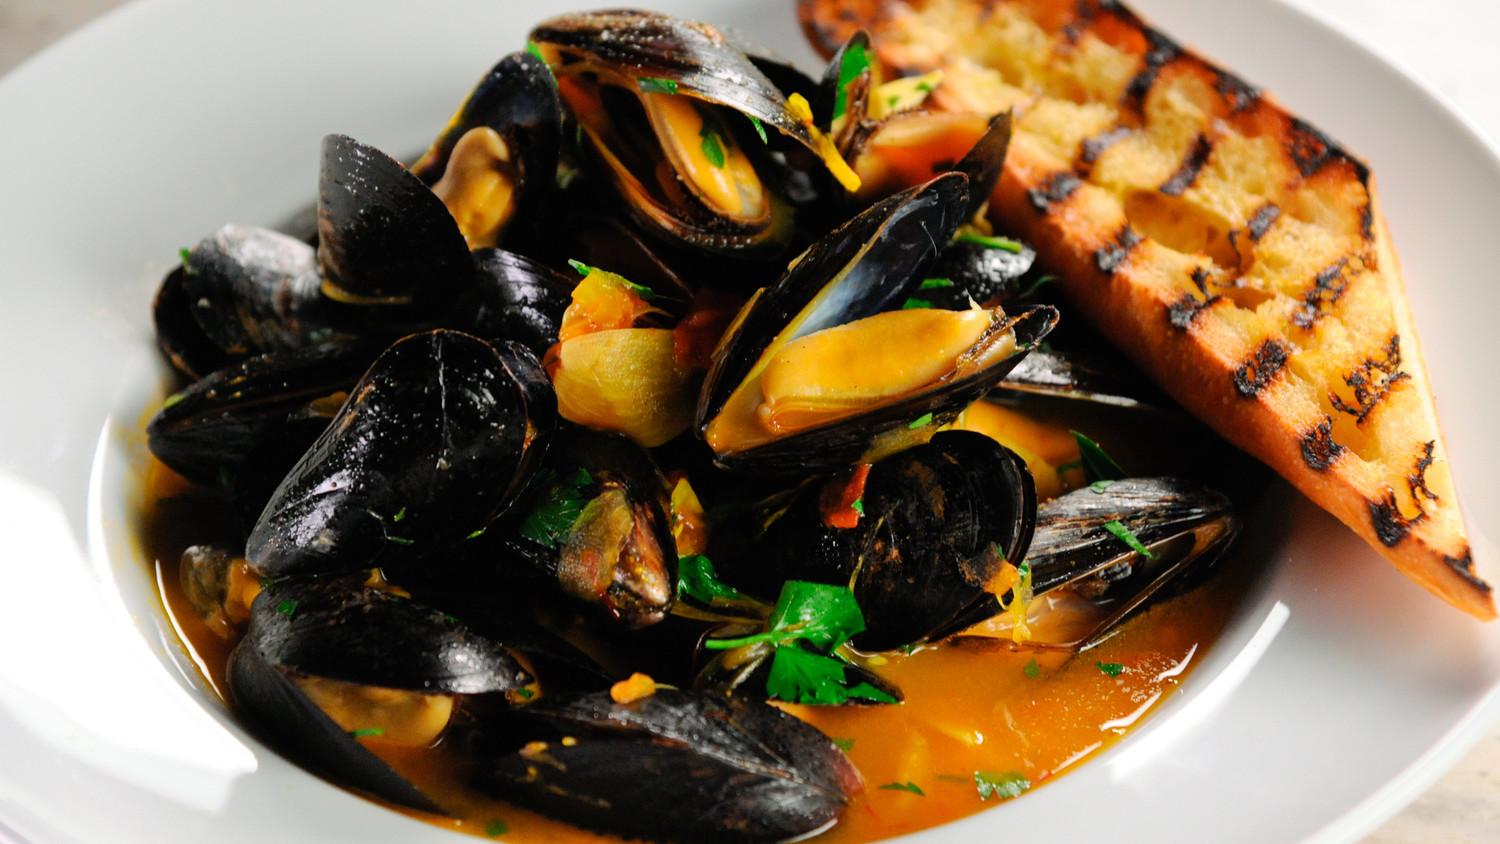 Mussels Wallpaper High Quality